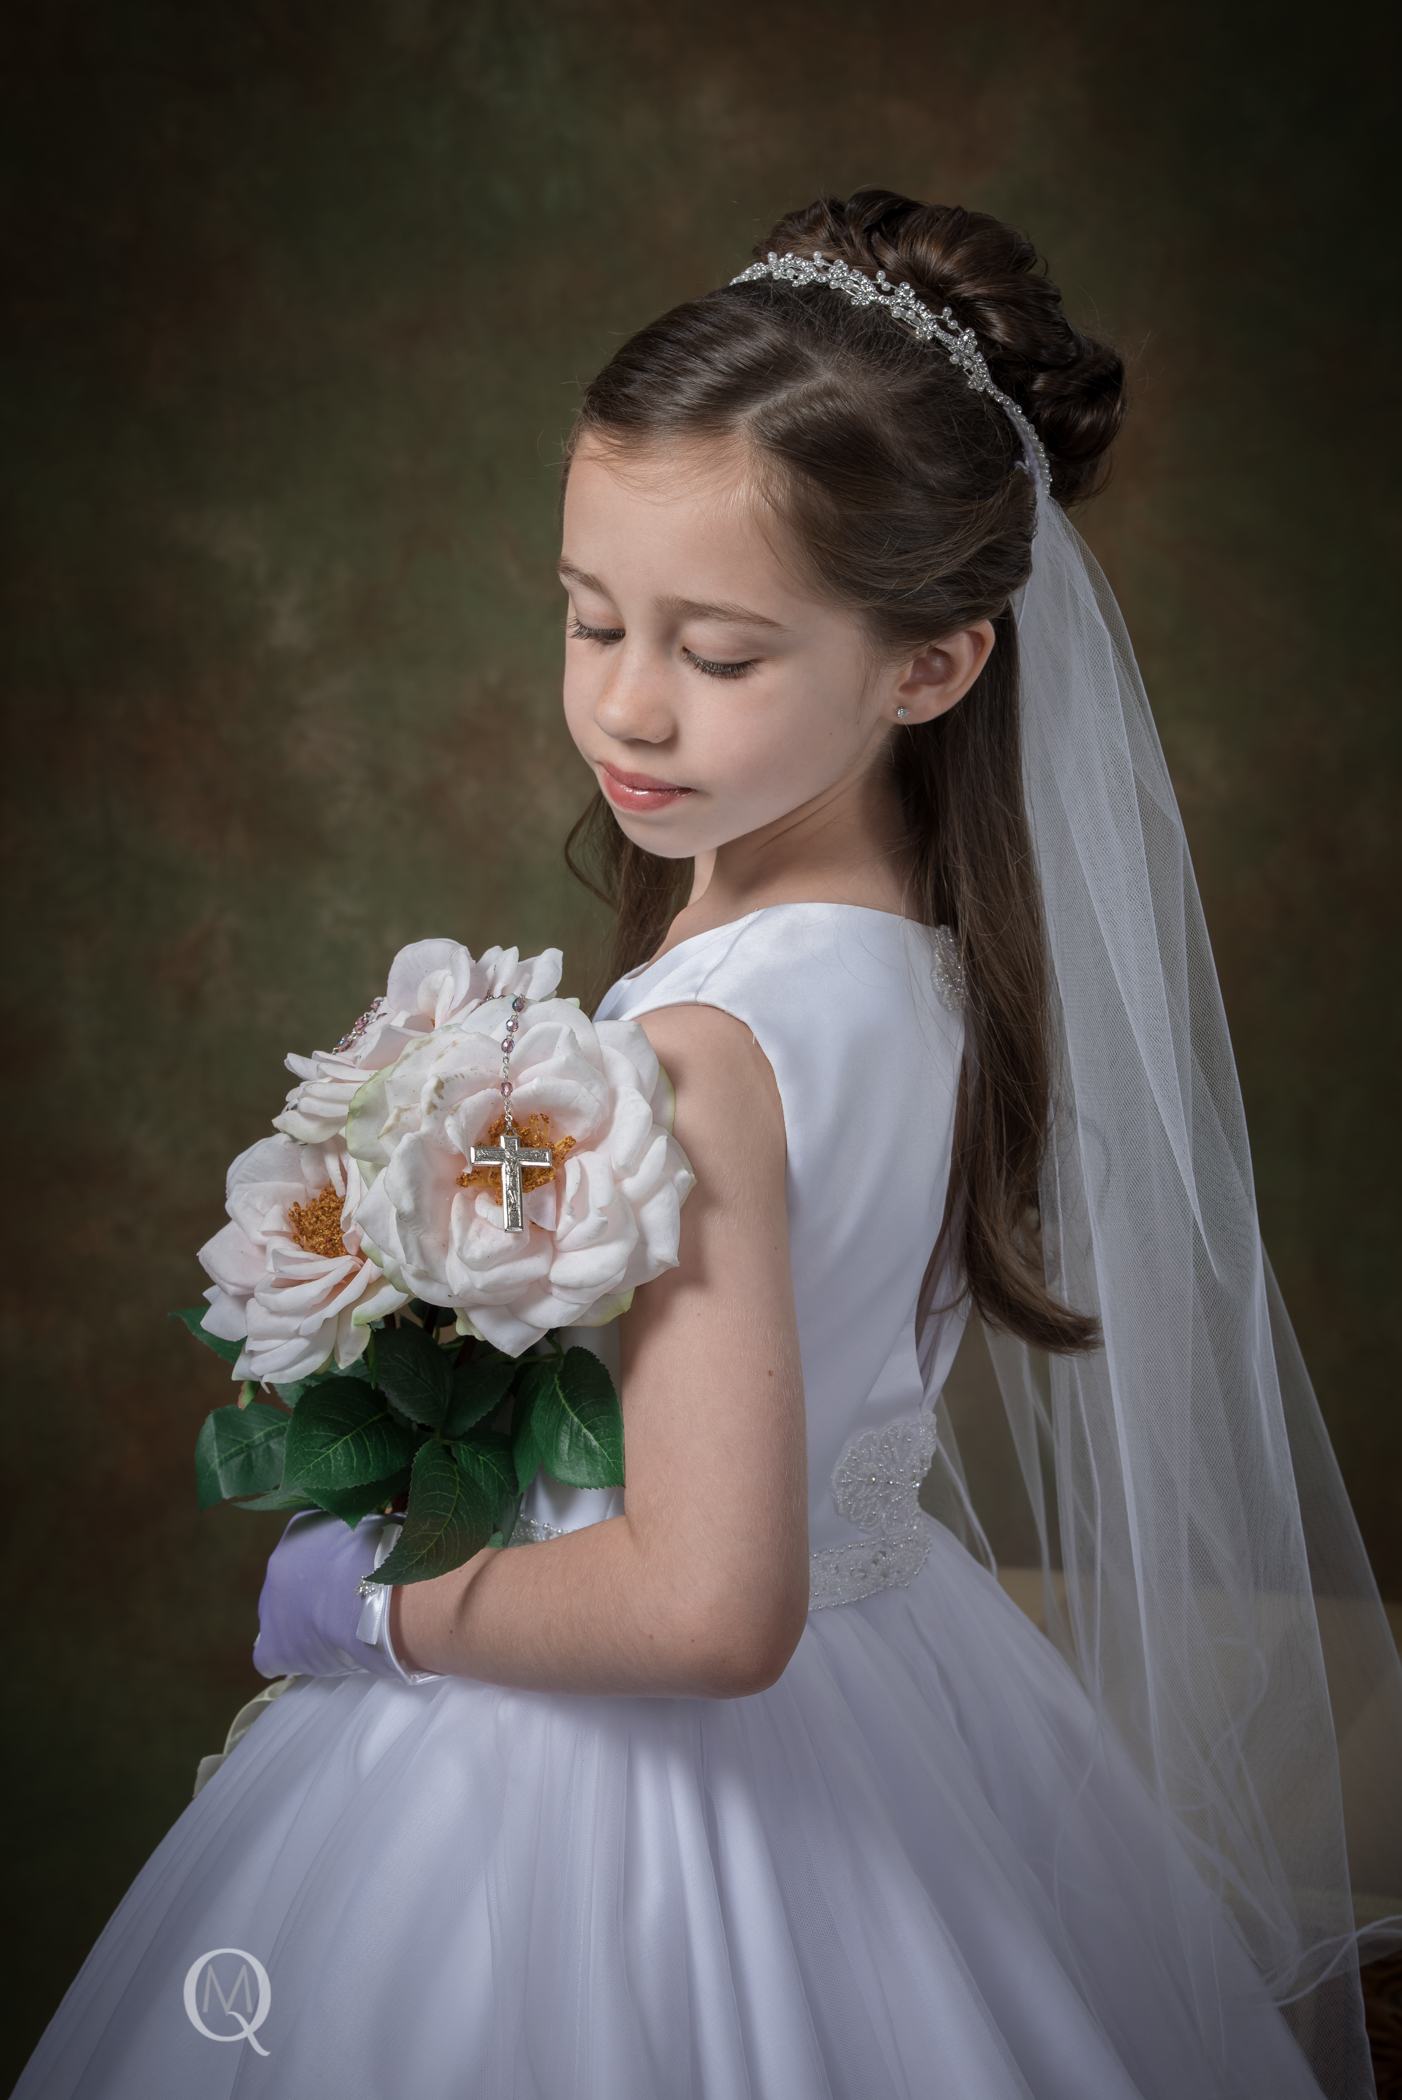 FIRST COMMUNION — Dina Rosa Photography